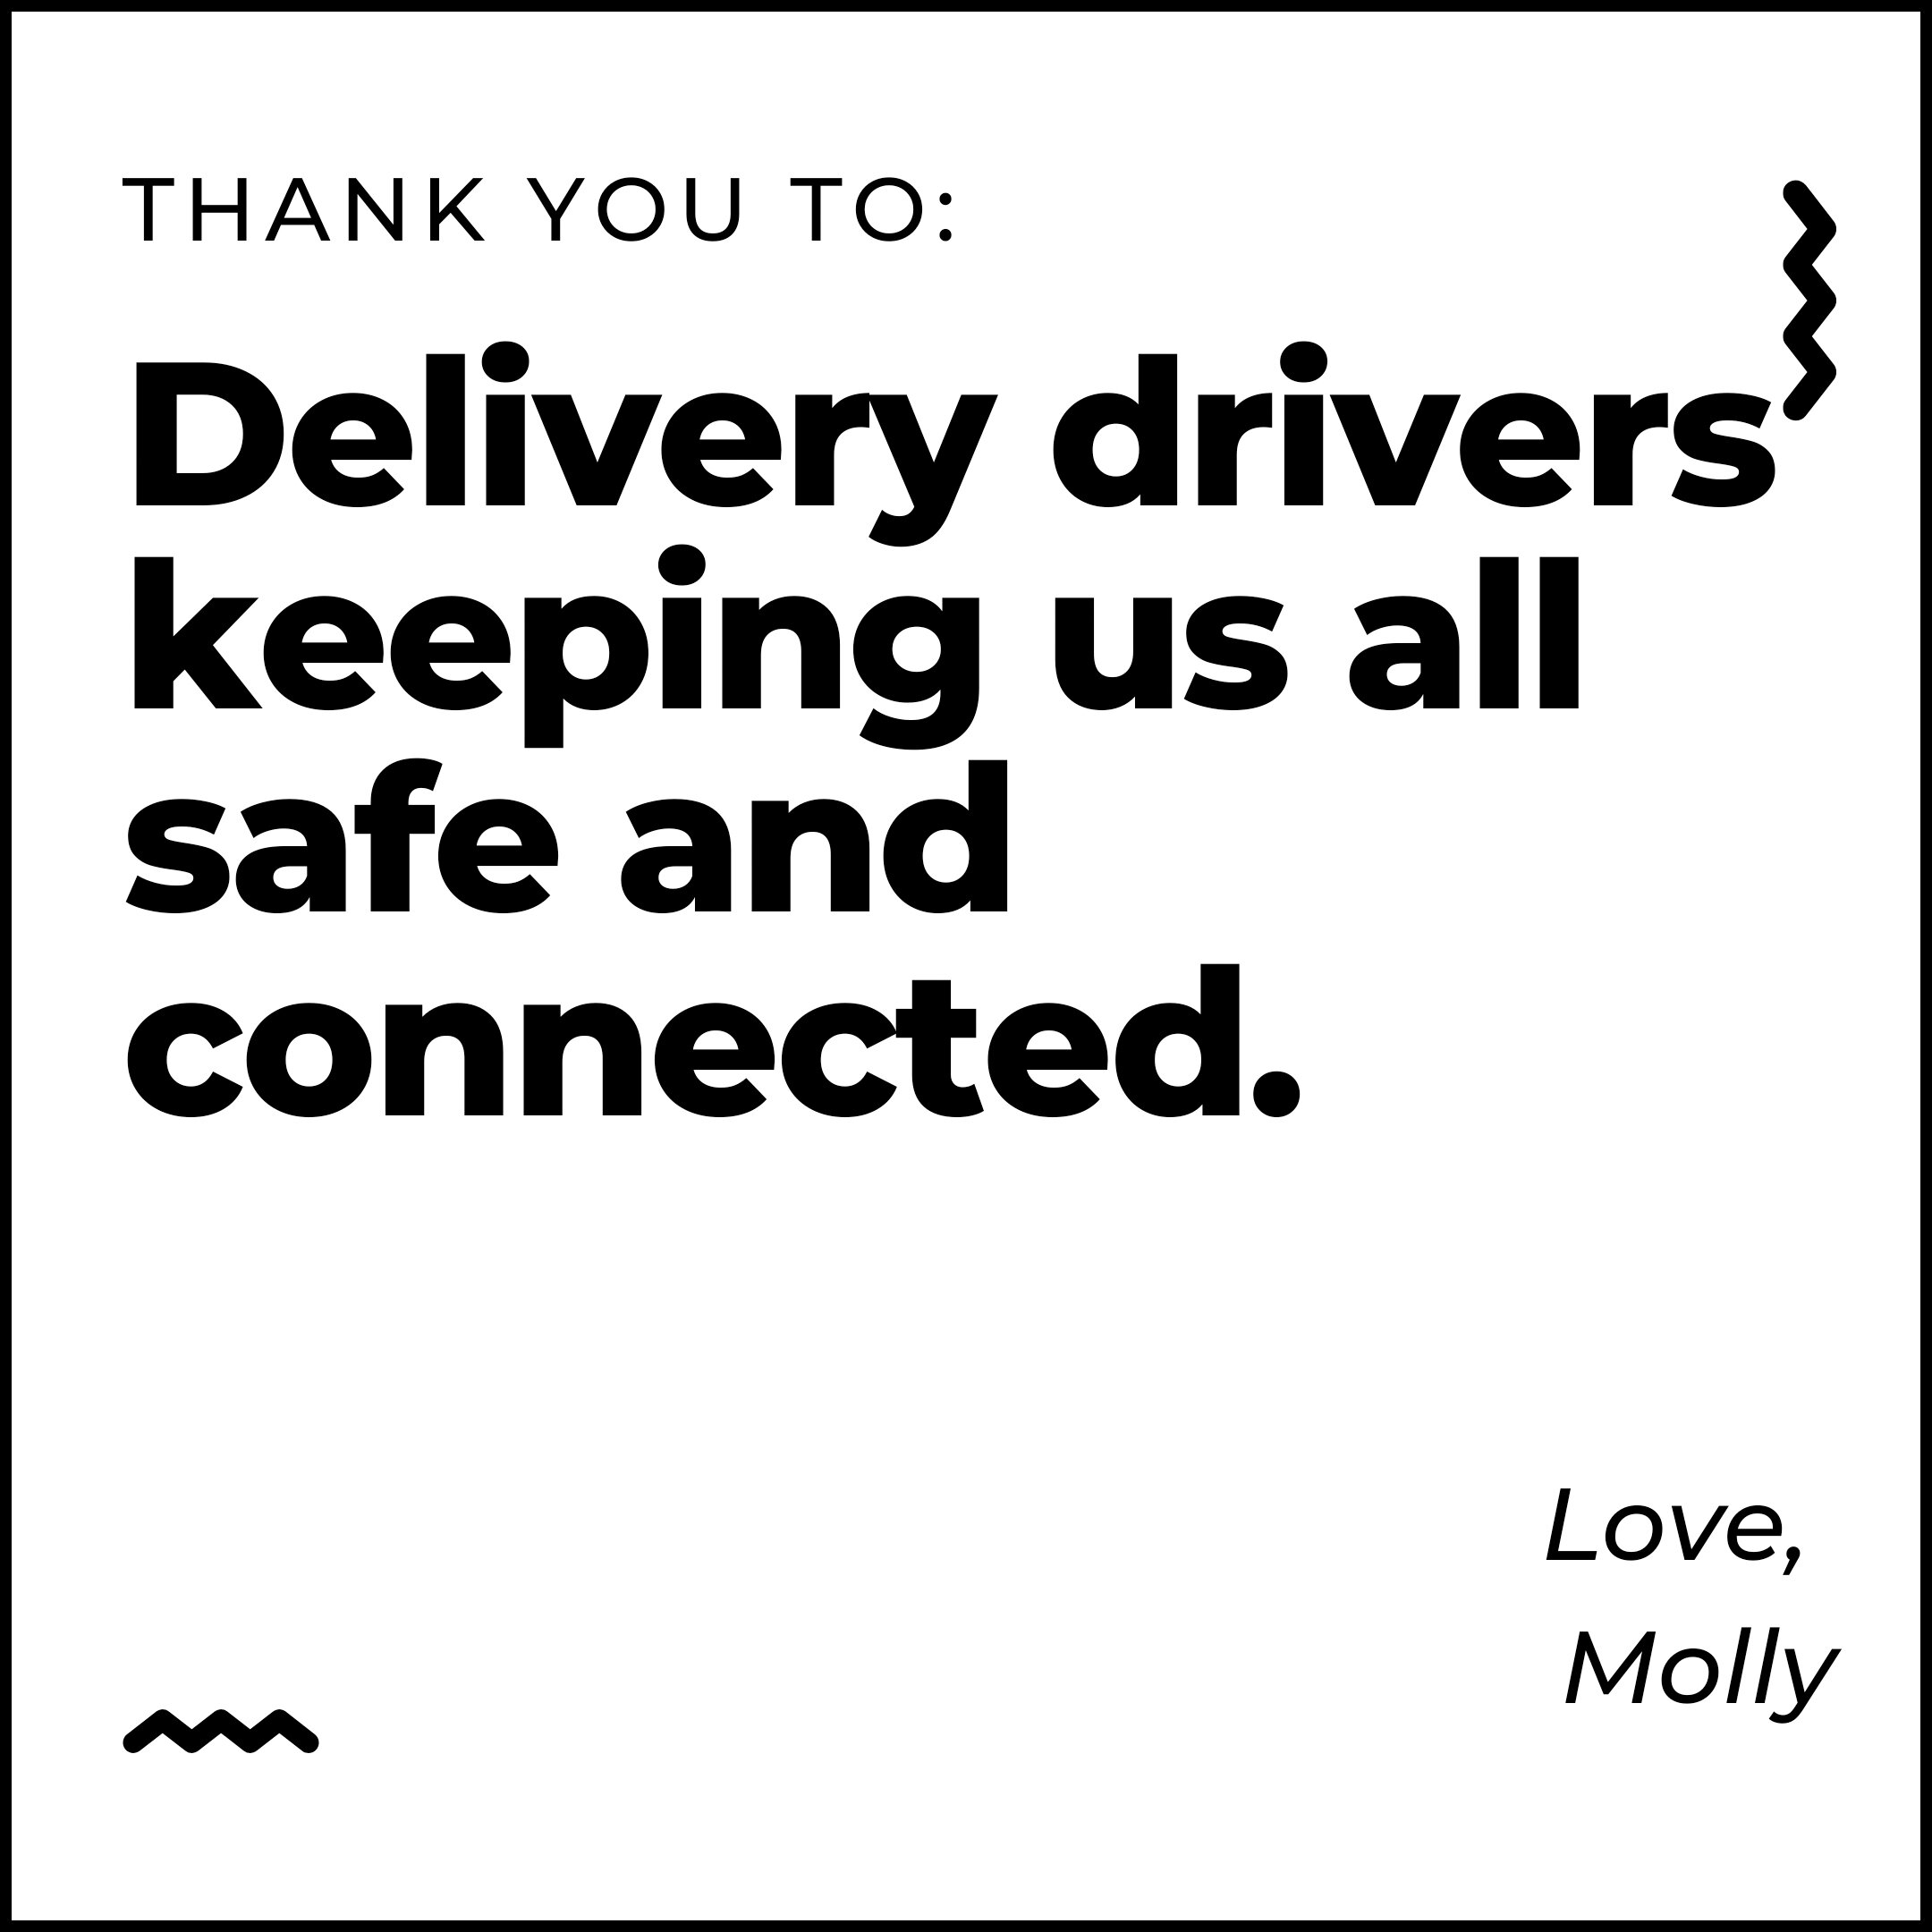 Delivery drivers keeping us all safe and connected. Ad Campaign